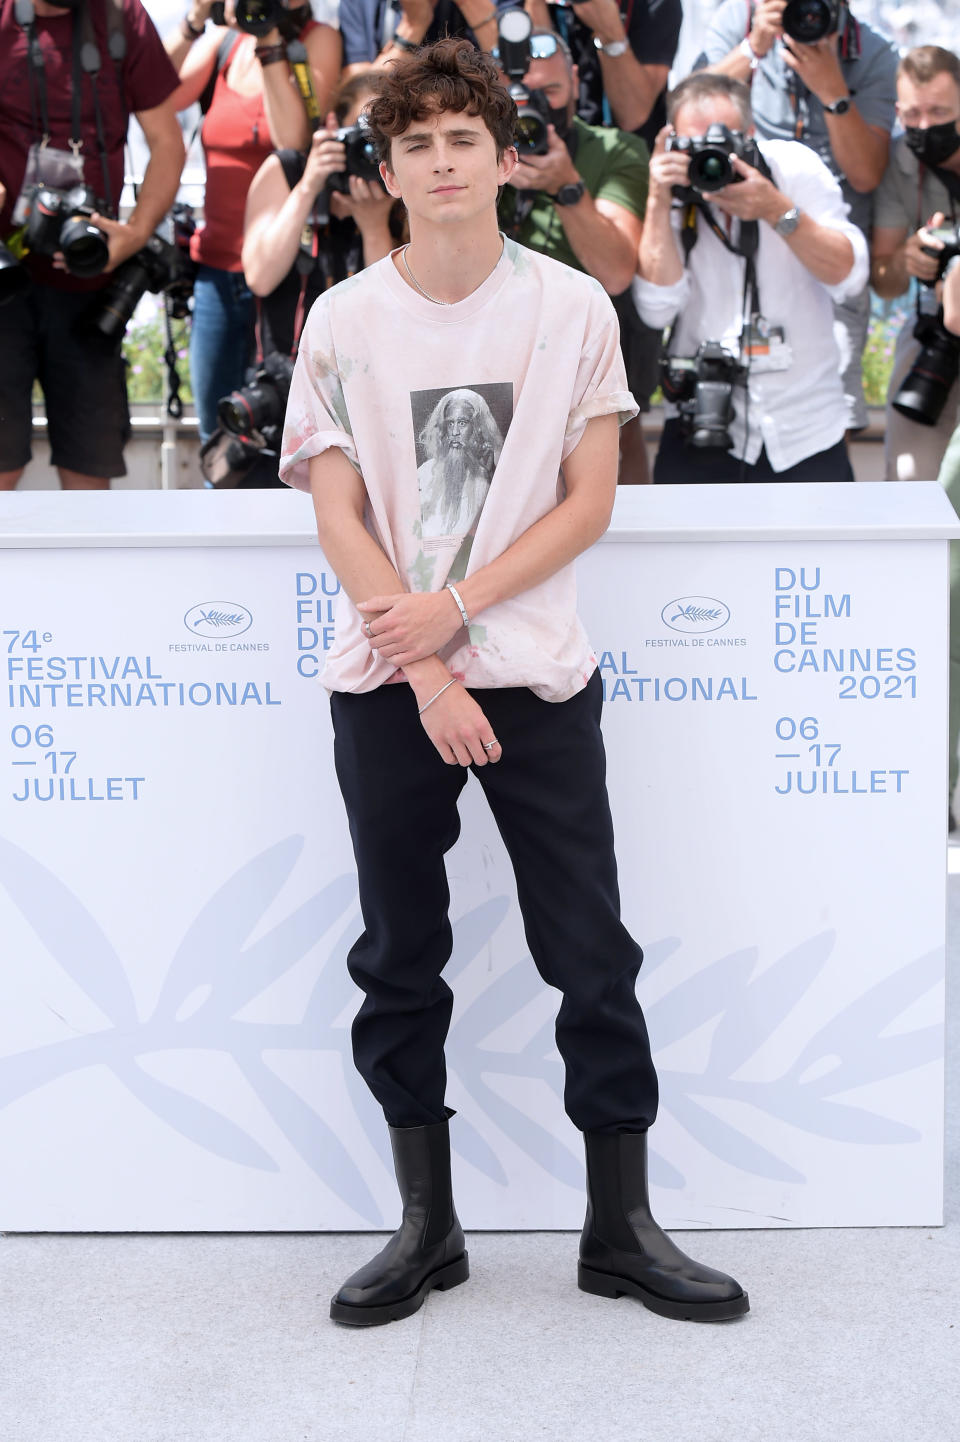 Timoth&#xe9;e Chalamet at the photocall of &#x002018;The French Dispatch&#x002019; during the 74th annual Cannes Film Festival in Cannes, France, on July 13, 2021. - Credit: maximon / MEGA